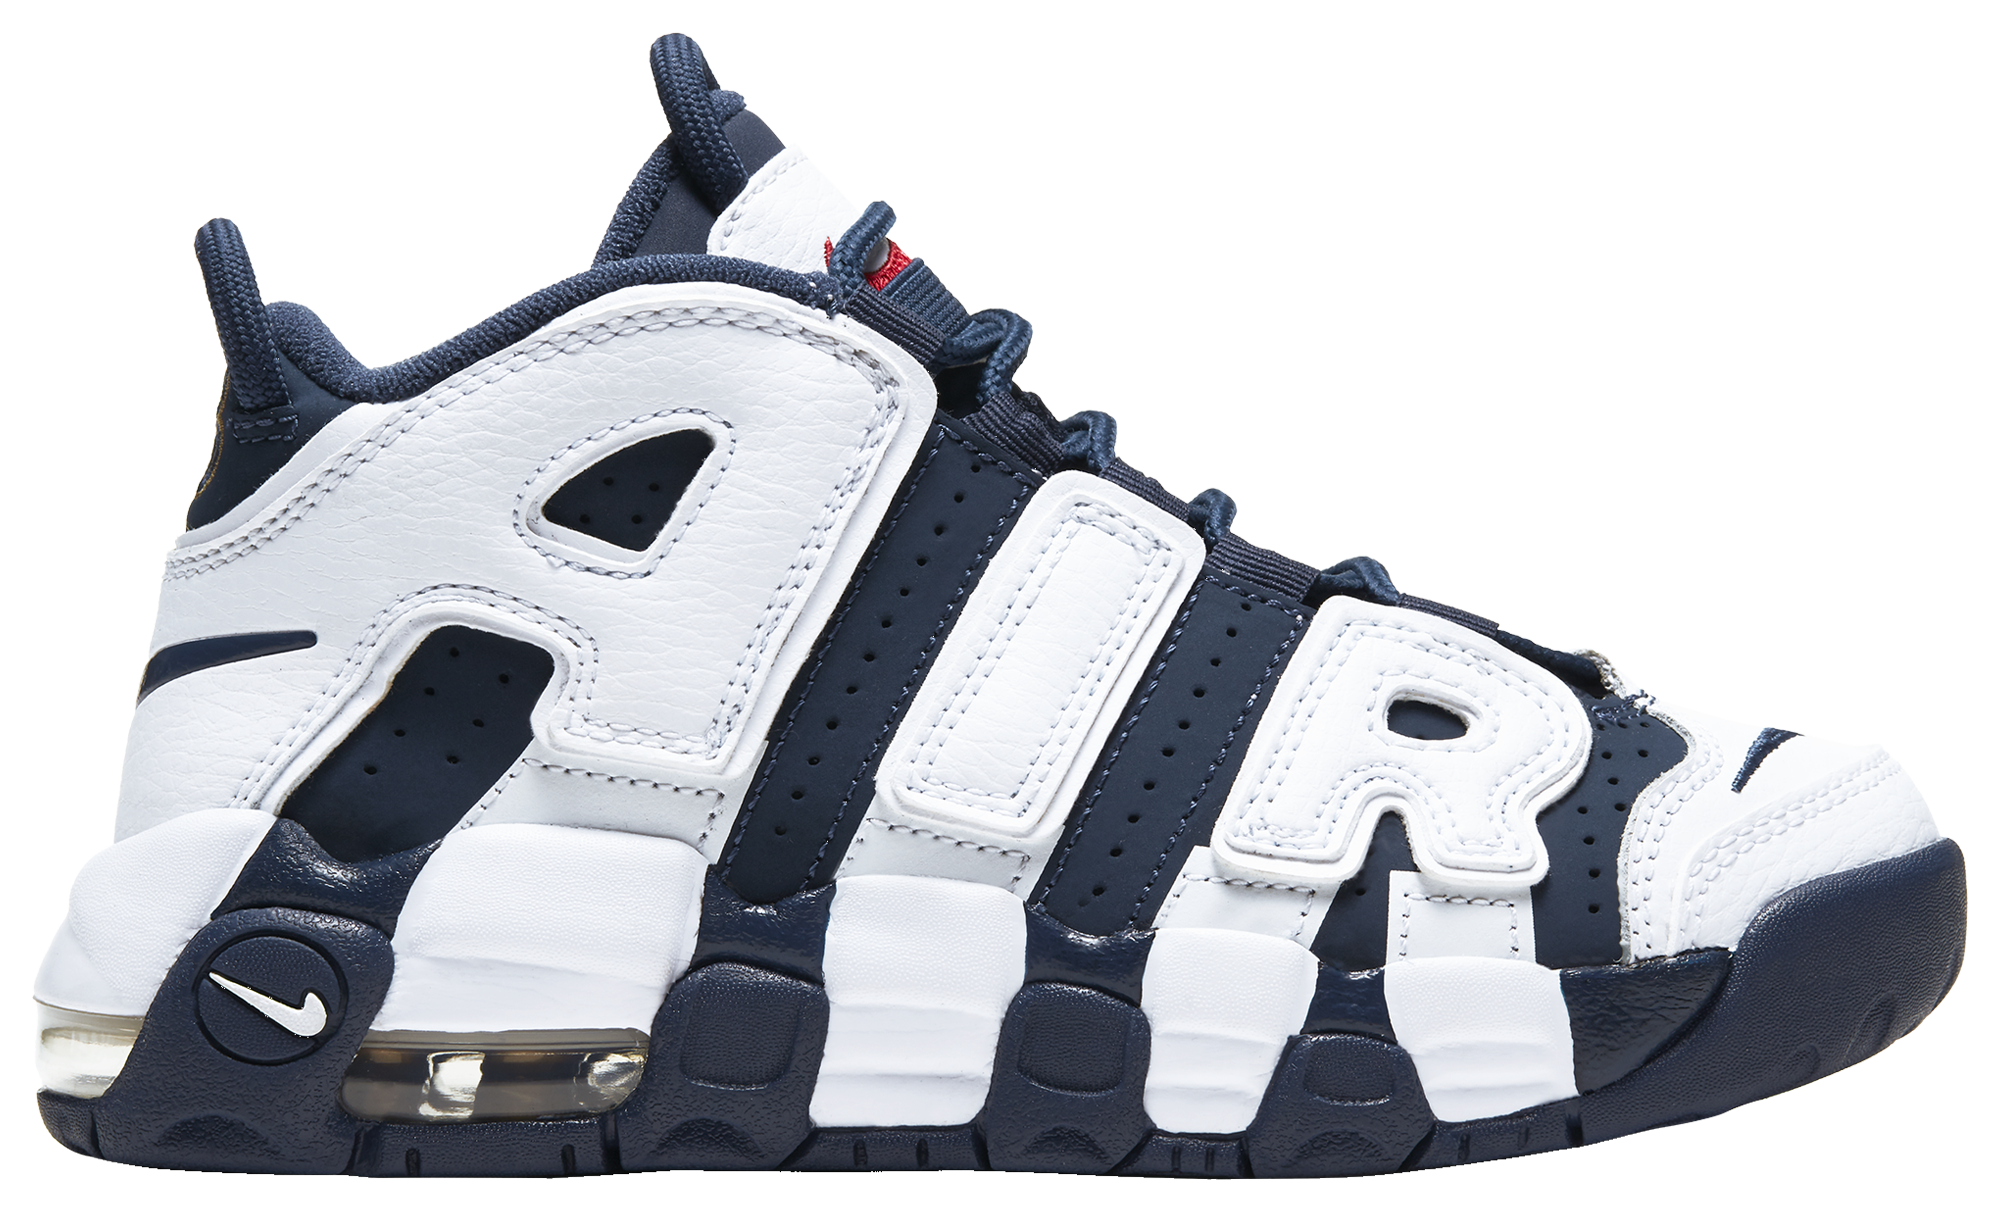 nike air uptempo champs